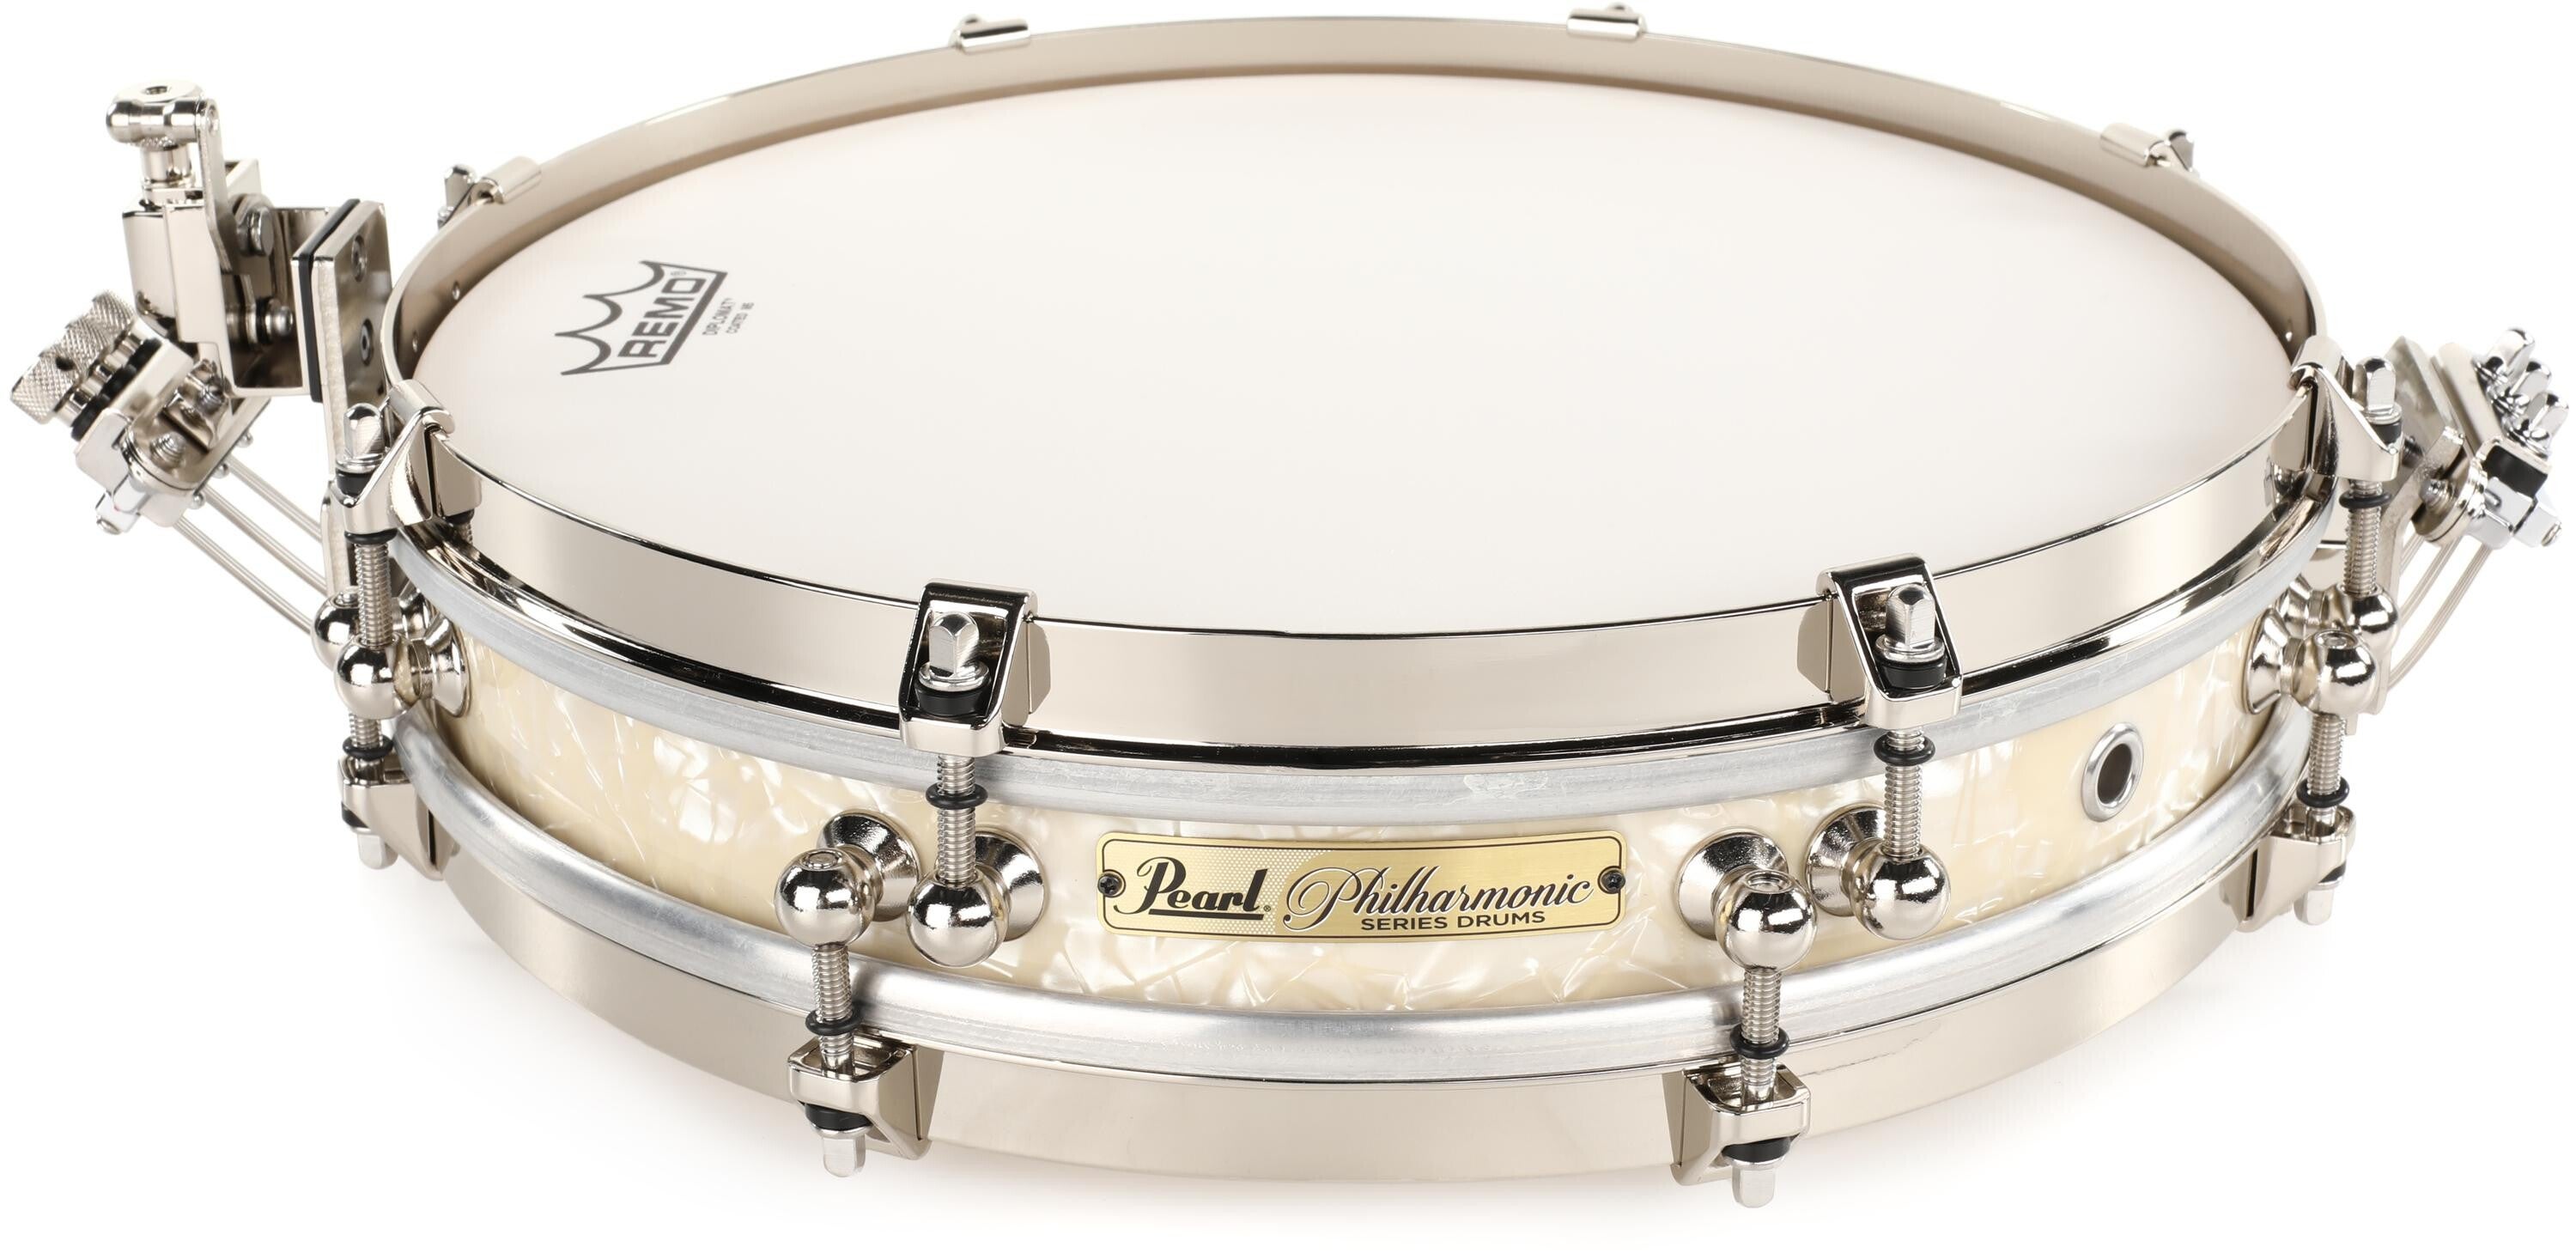 Pearl Philharmonic Pancake Snare Drum - 2.5-inch x 13-inch